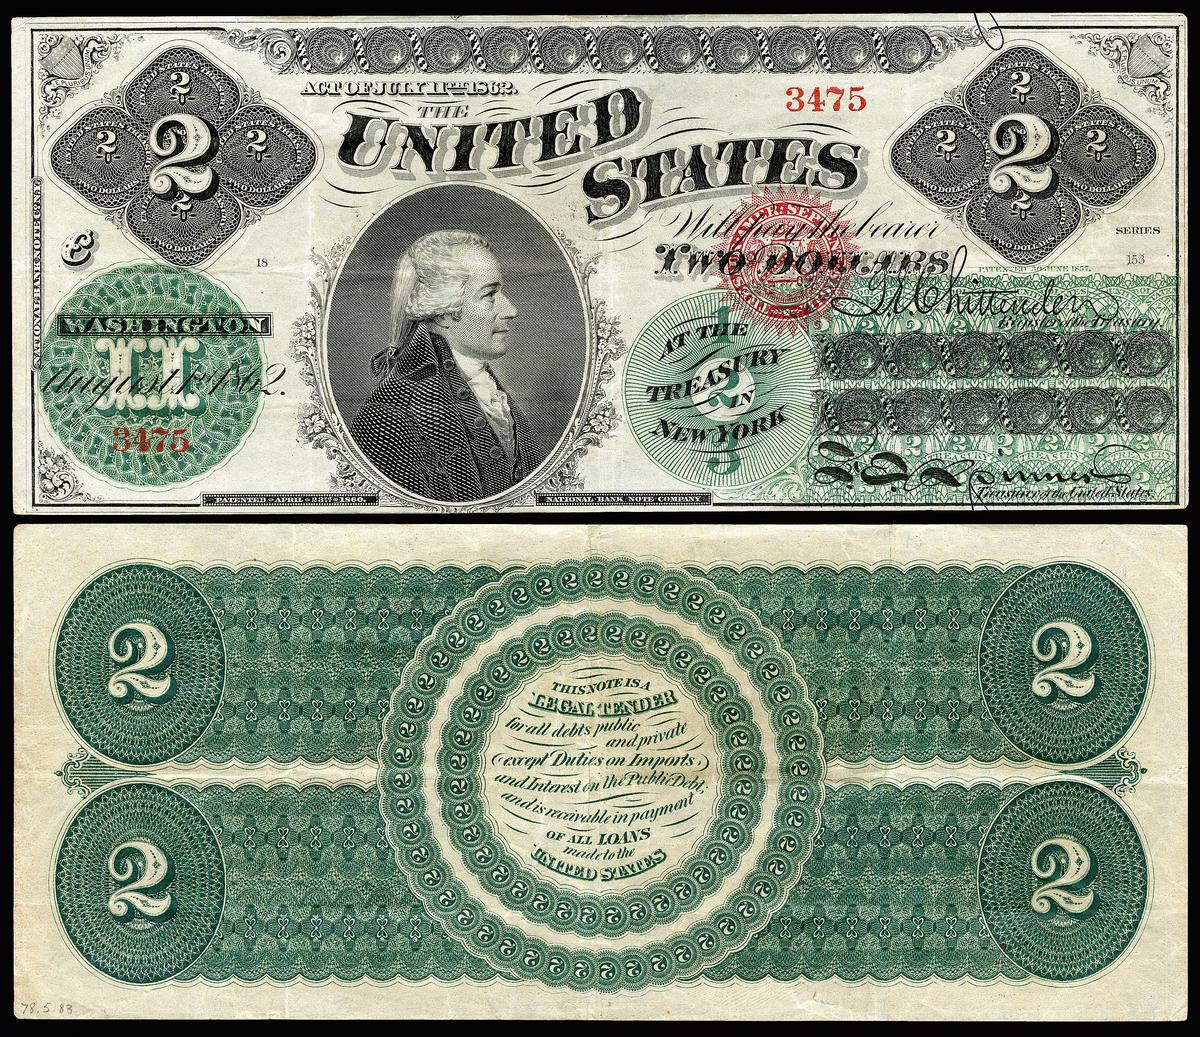 An 1862 $2 bill, which uncirculated is valued to fetch $2,800 at auction. (<a href="https://en.wikipedia.org/wiki/File:US-$2-LT-1862-Fr-41.jpg">National Numismatic Collection, National Museum of American History</a>/CC BY-SA 4.0)